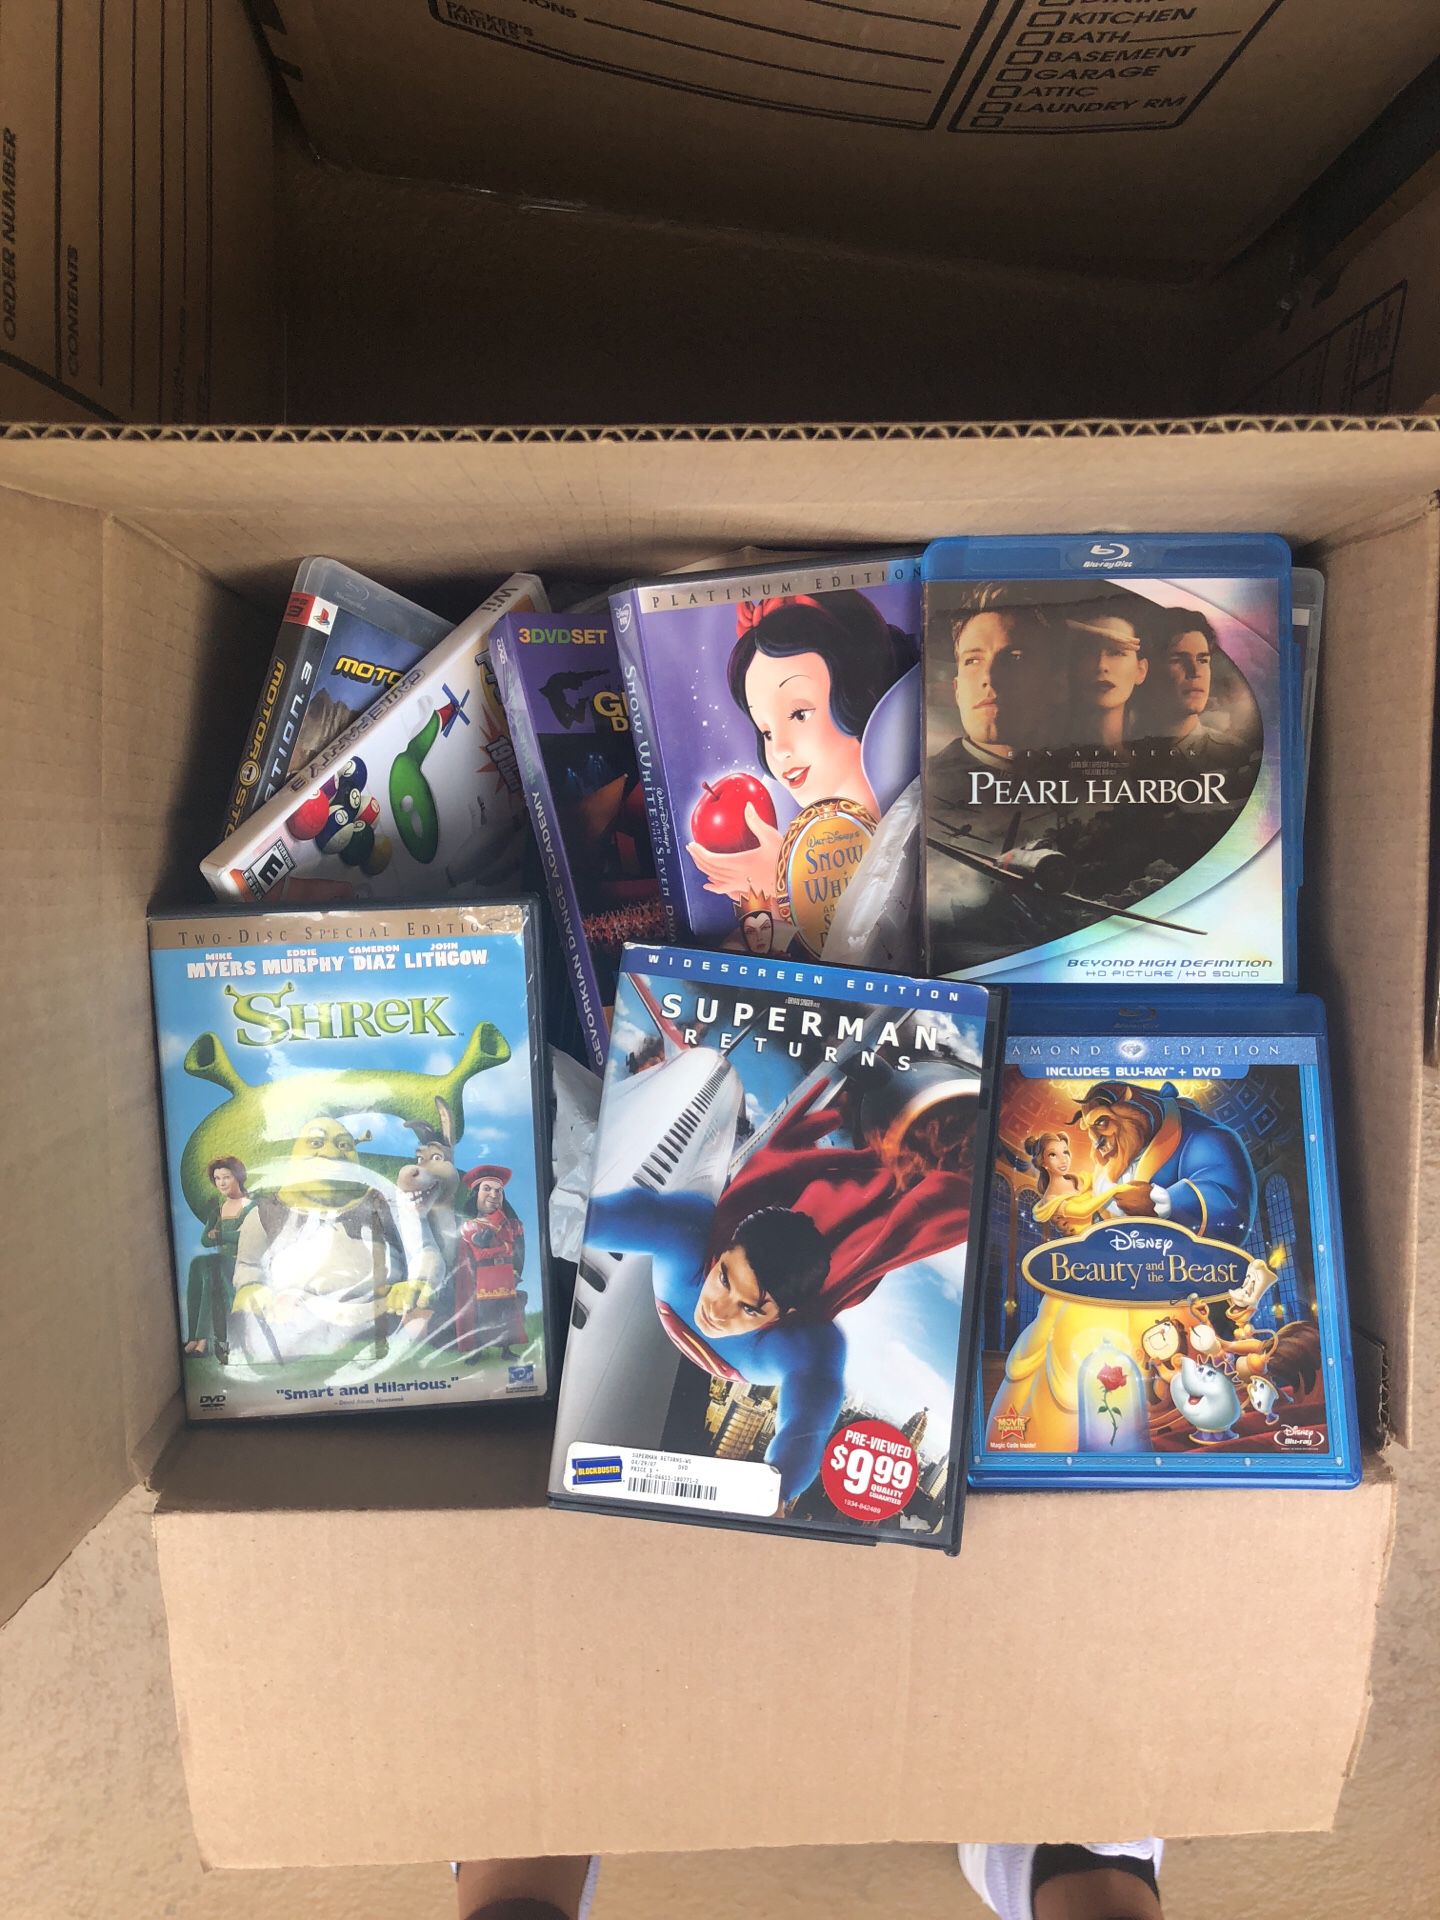 Entire box full of DVDS, Wii games, and PS3 games